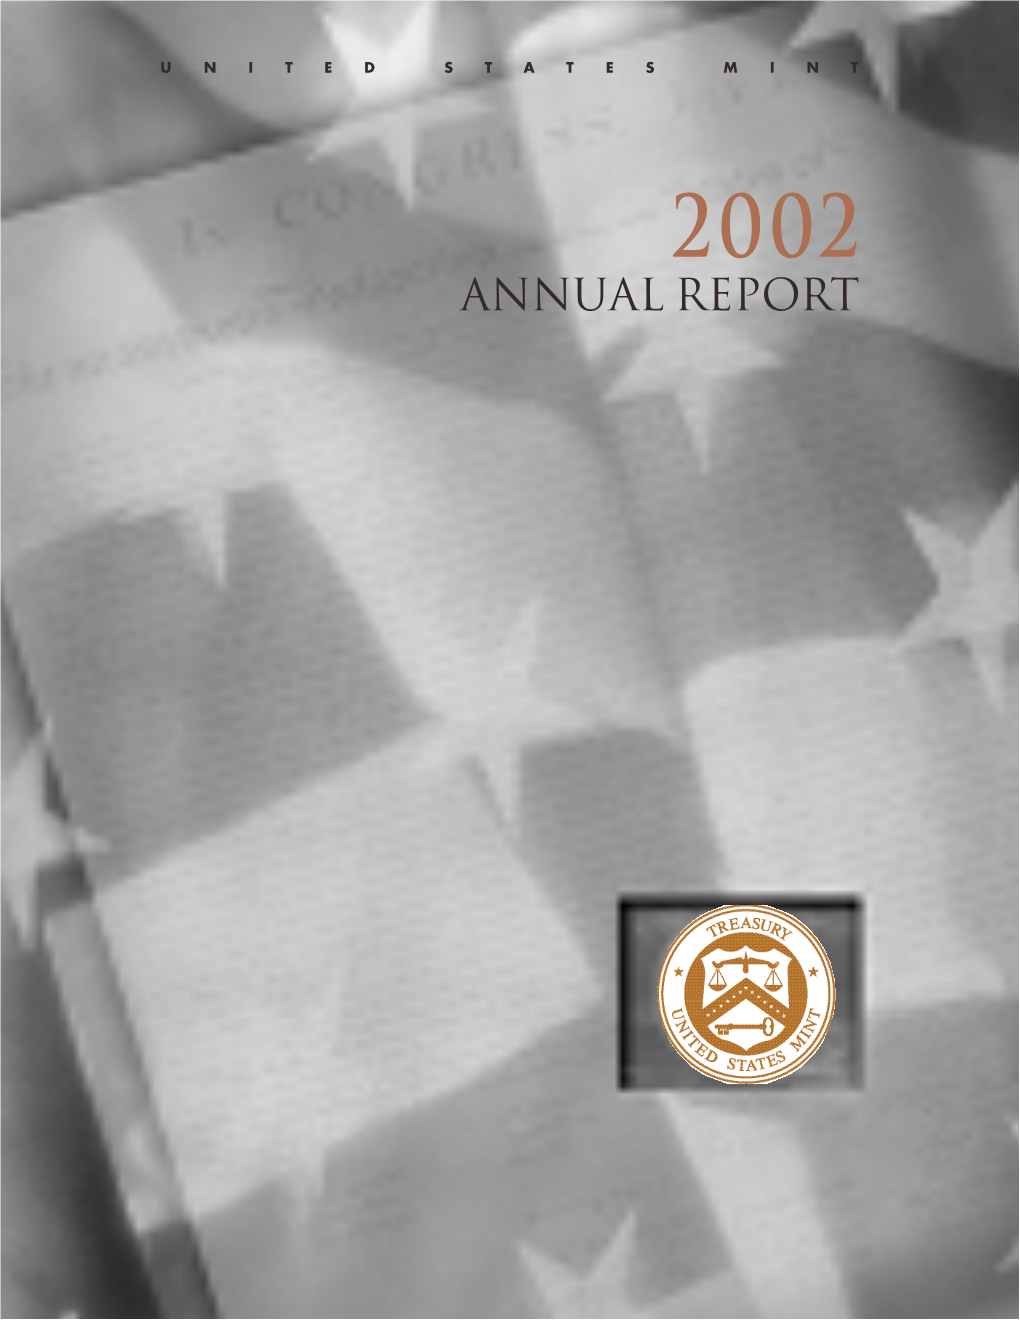 2002 United States Mint Annual Report